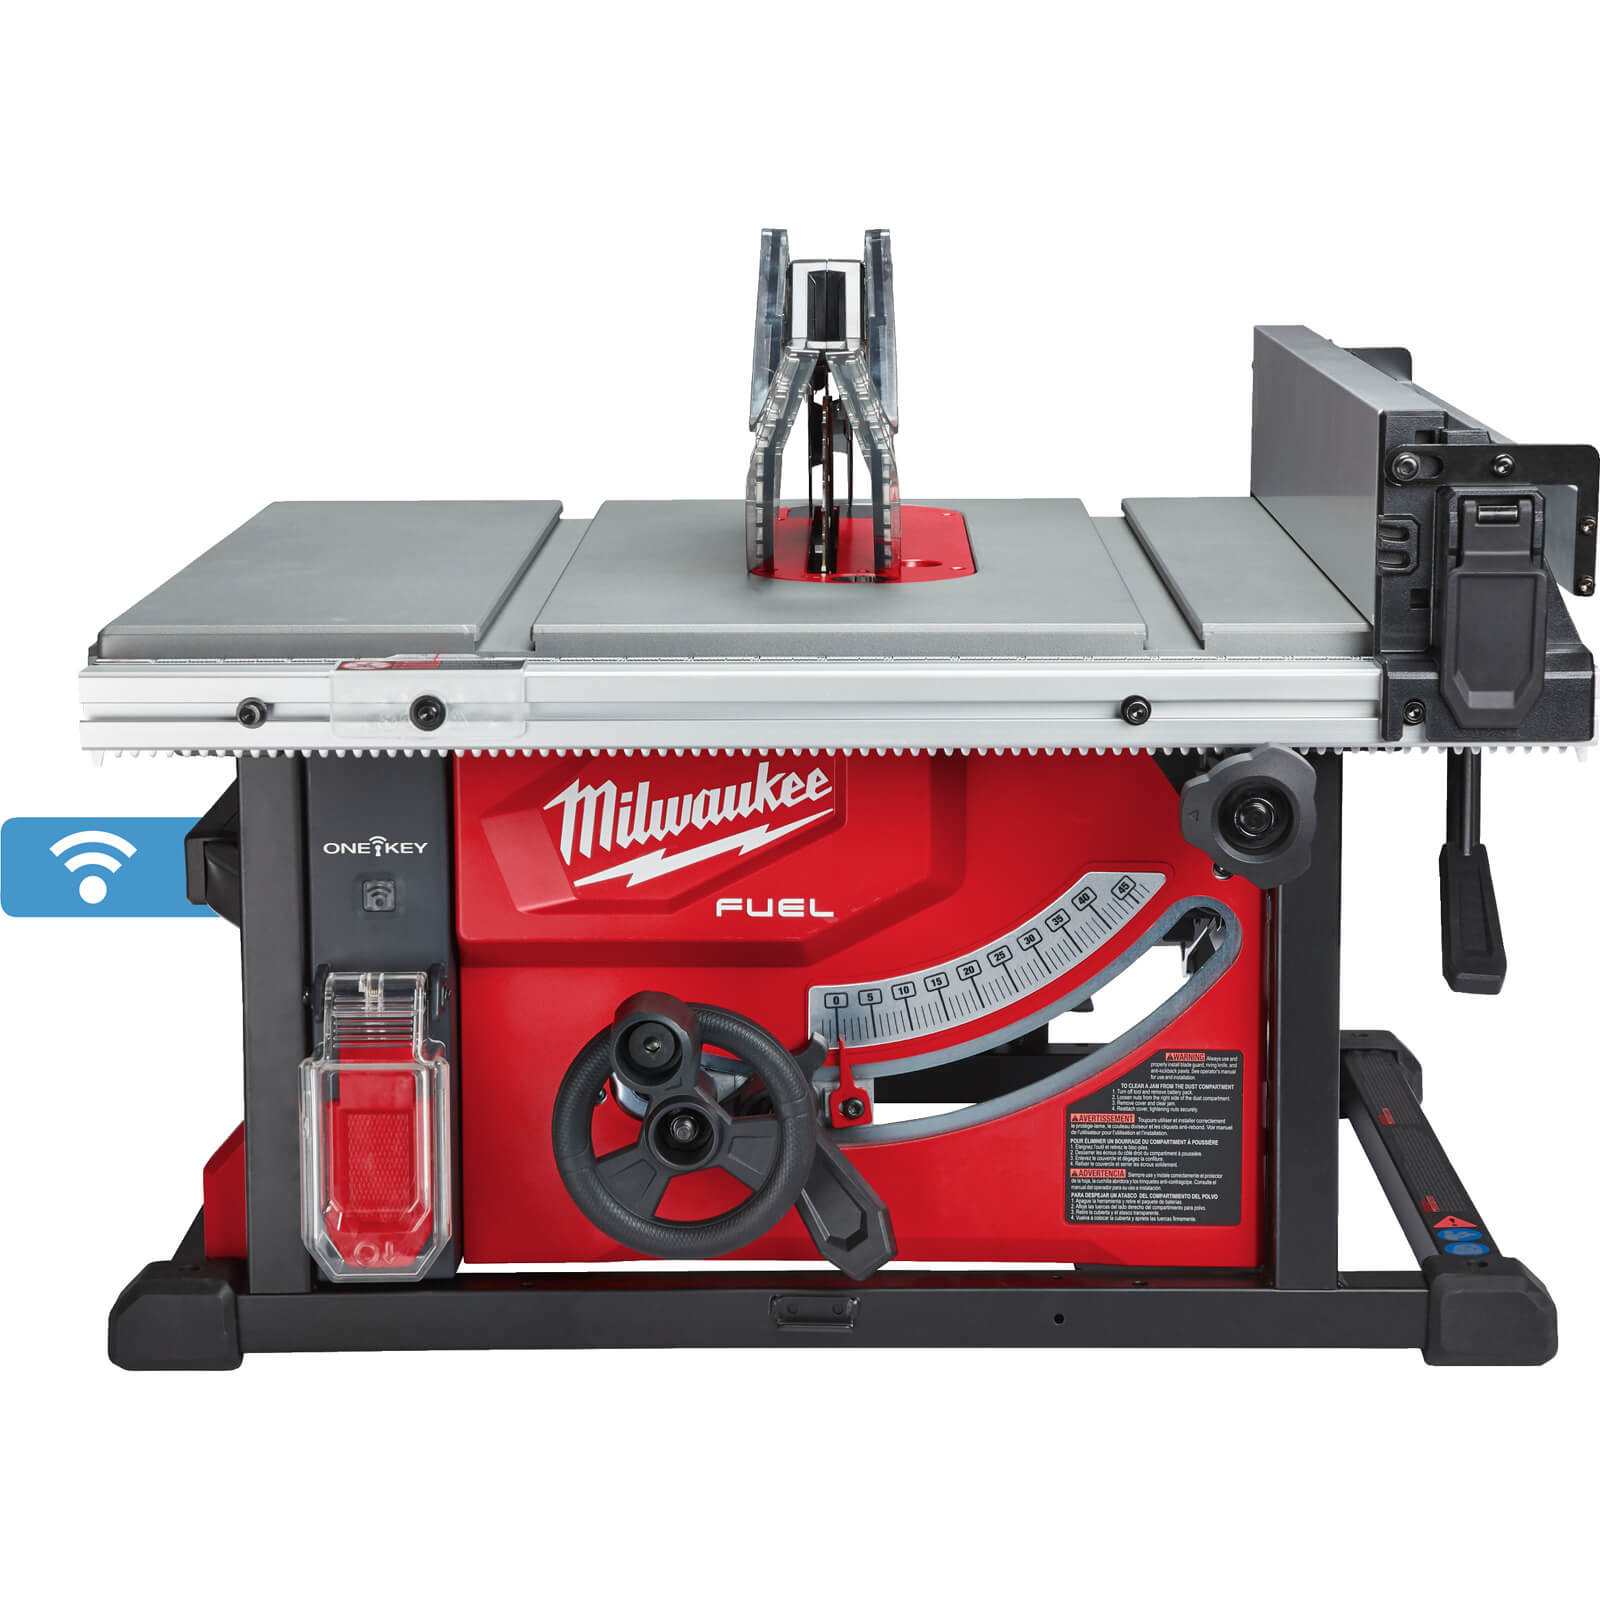 Milwaukee M18 FTS210 Fuel 18v Cordless Brushless Table Saw 210mm No Batteries No Charger No Case